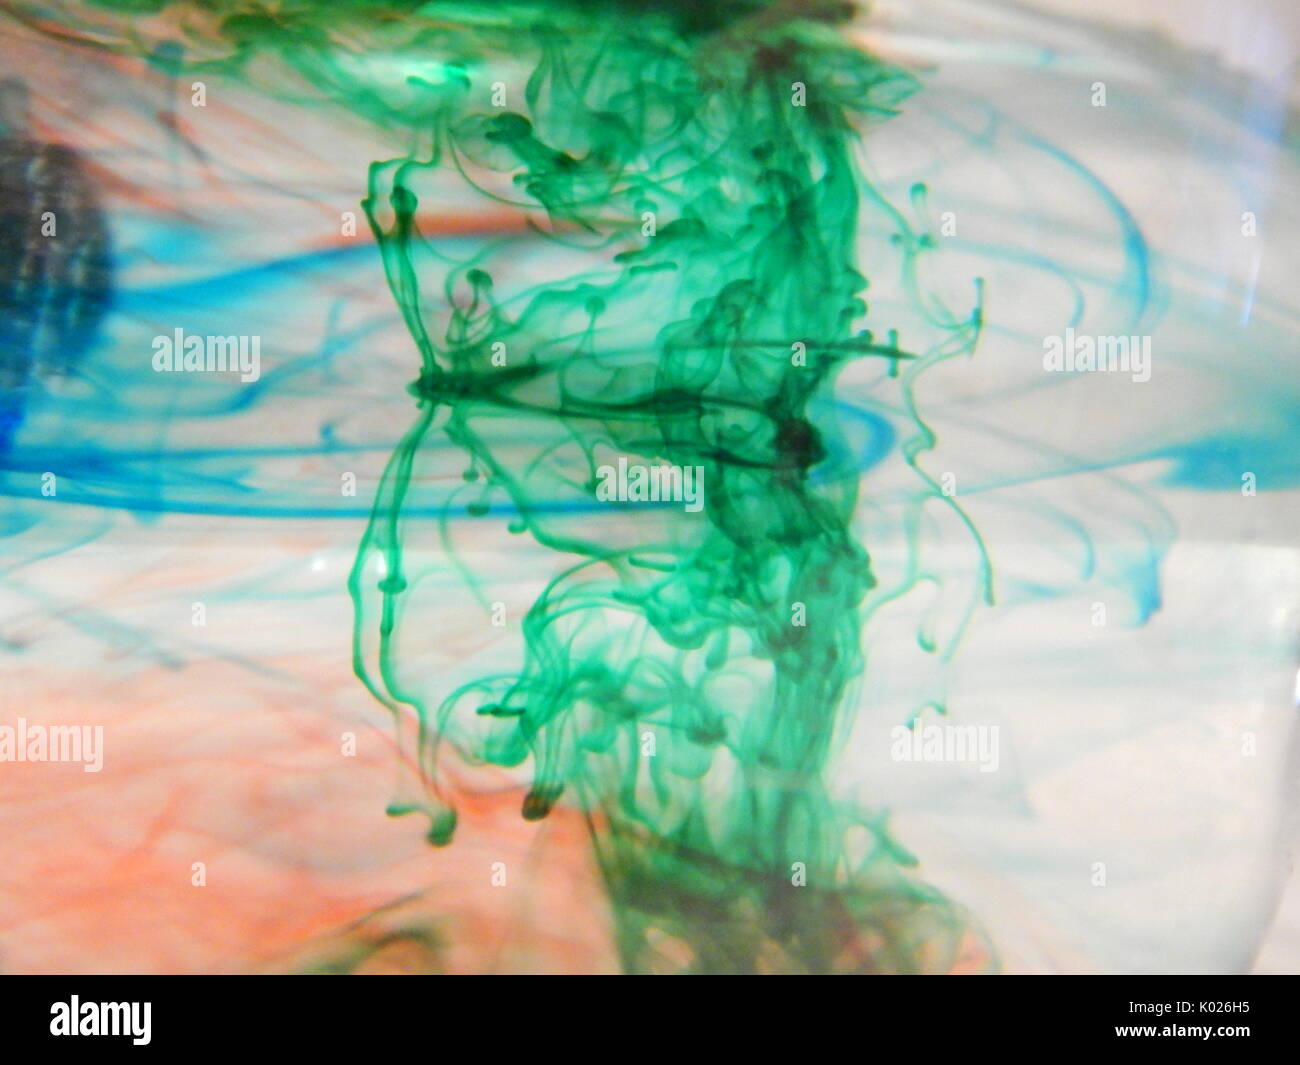 Food Coloring water experiment Stock Photo